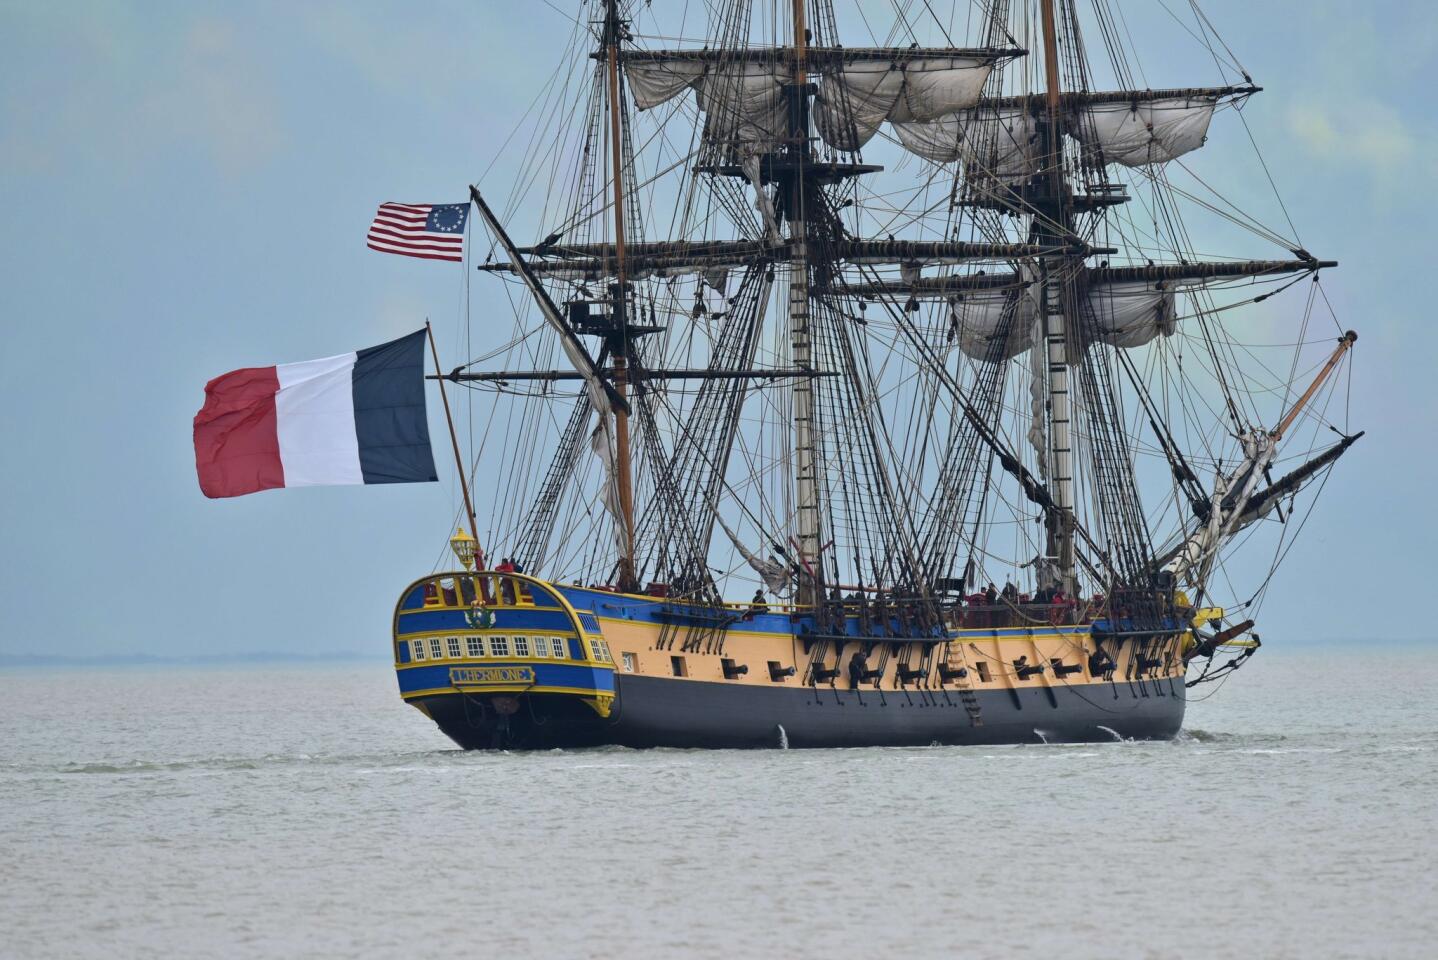 The replica of the French navy frigate Hermione, which played a key role in the American Revolution, set sail from France on its maiden voyage to the United States on April 18.